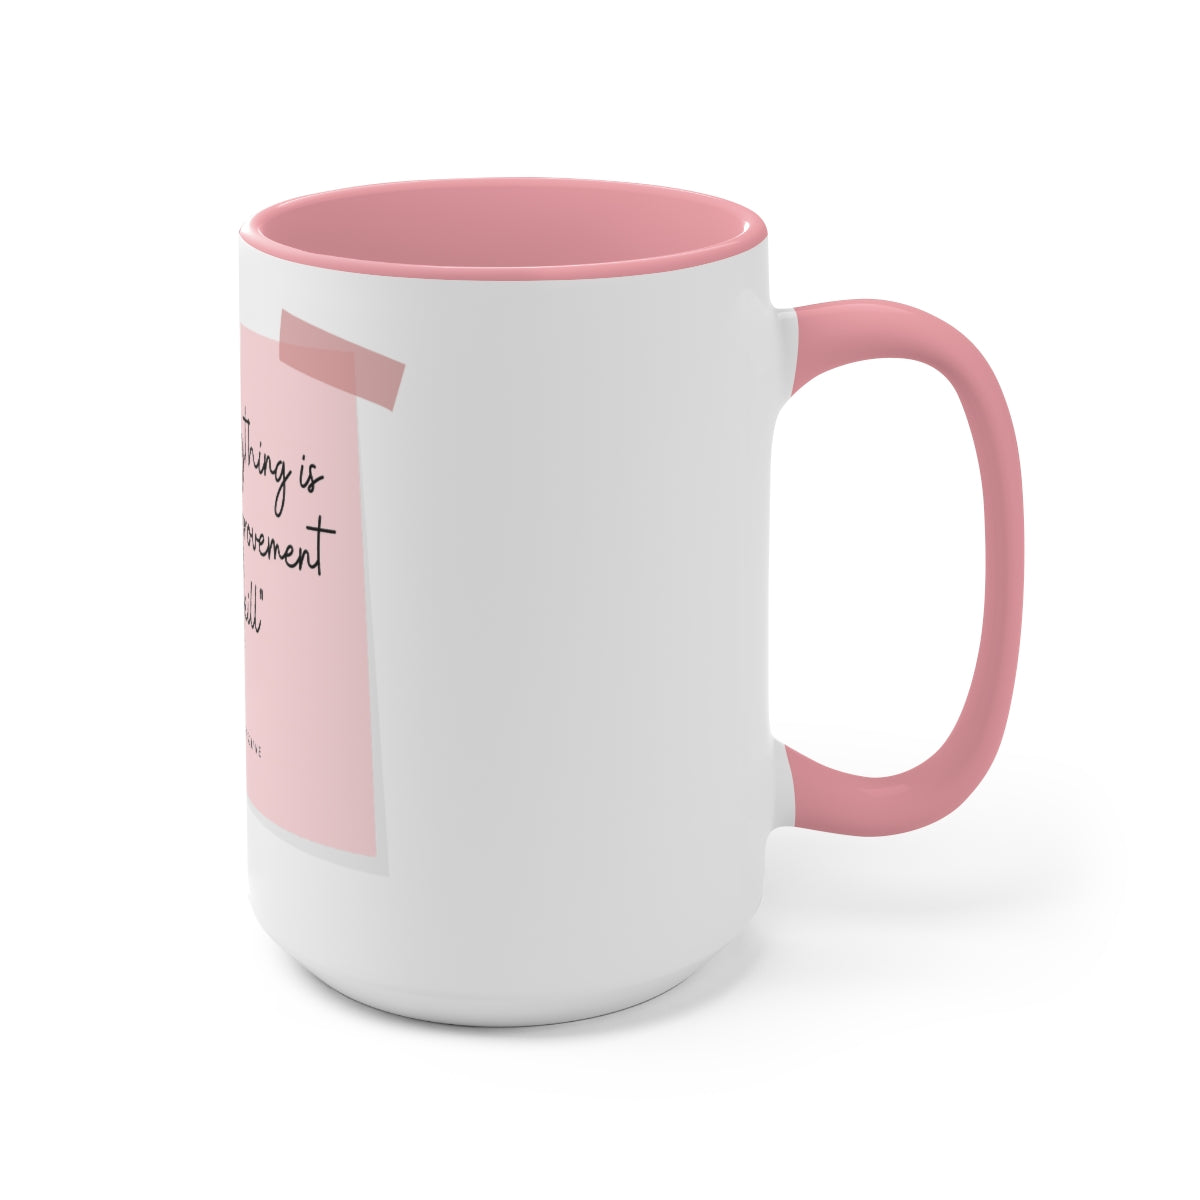 Motivation Mug | Not everything is about improvement or skill!